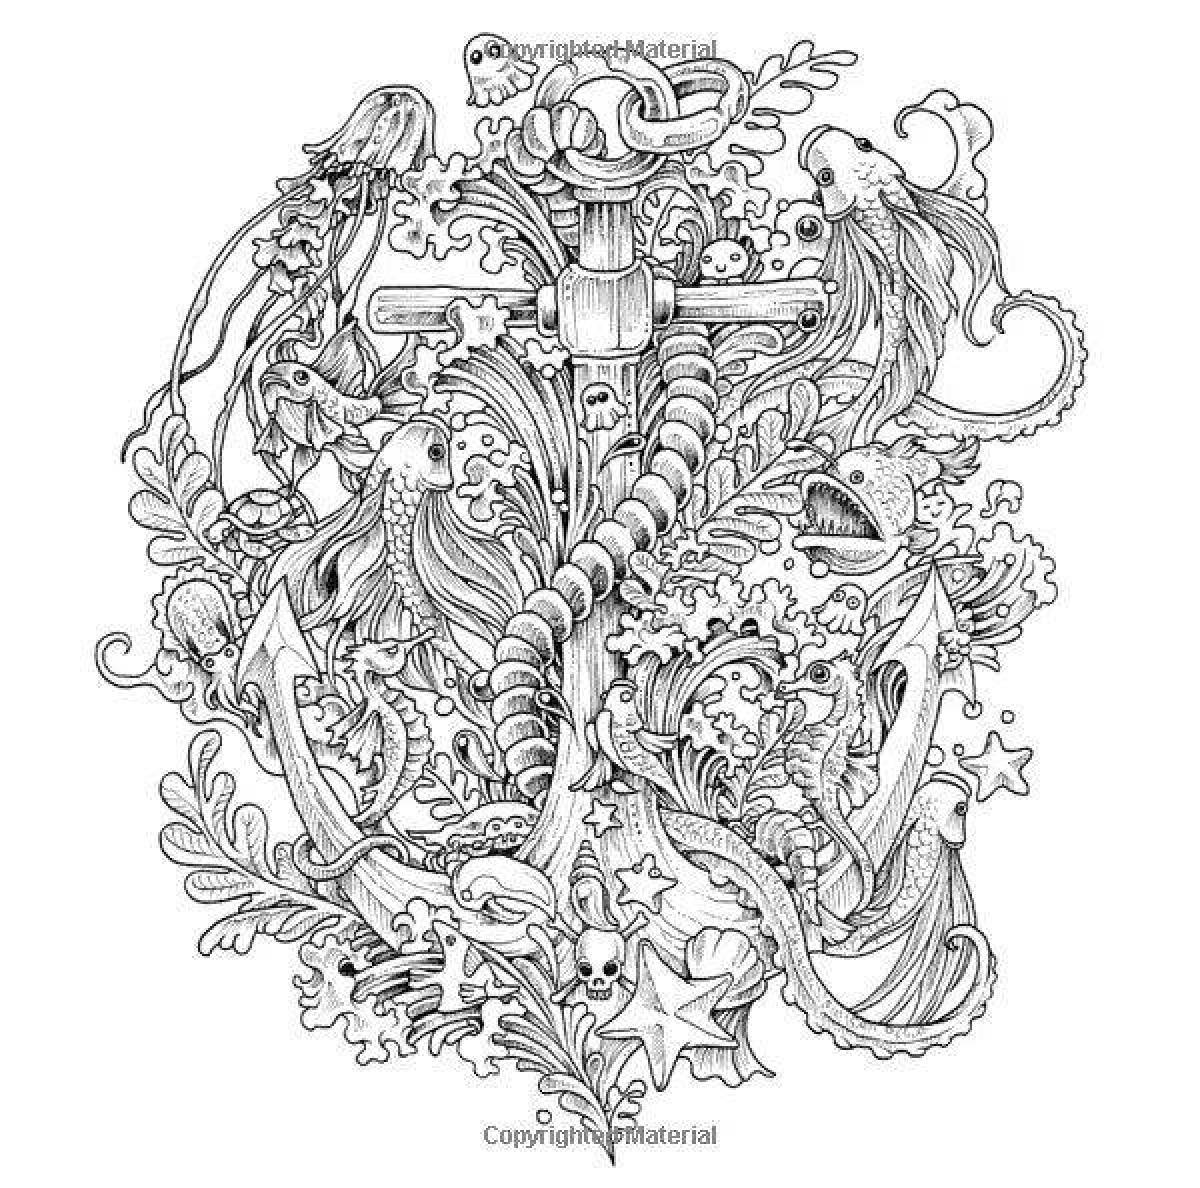 Exciting mythomorphosis coloring book